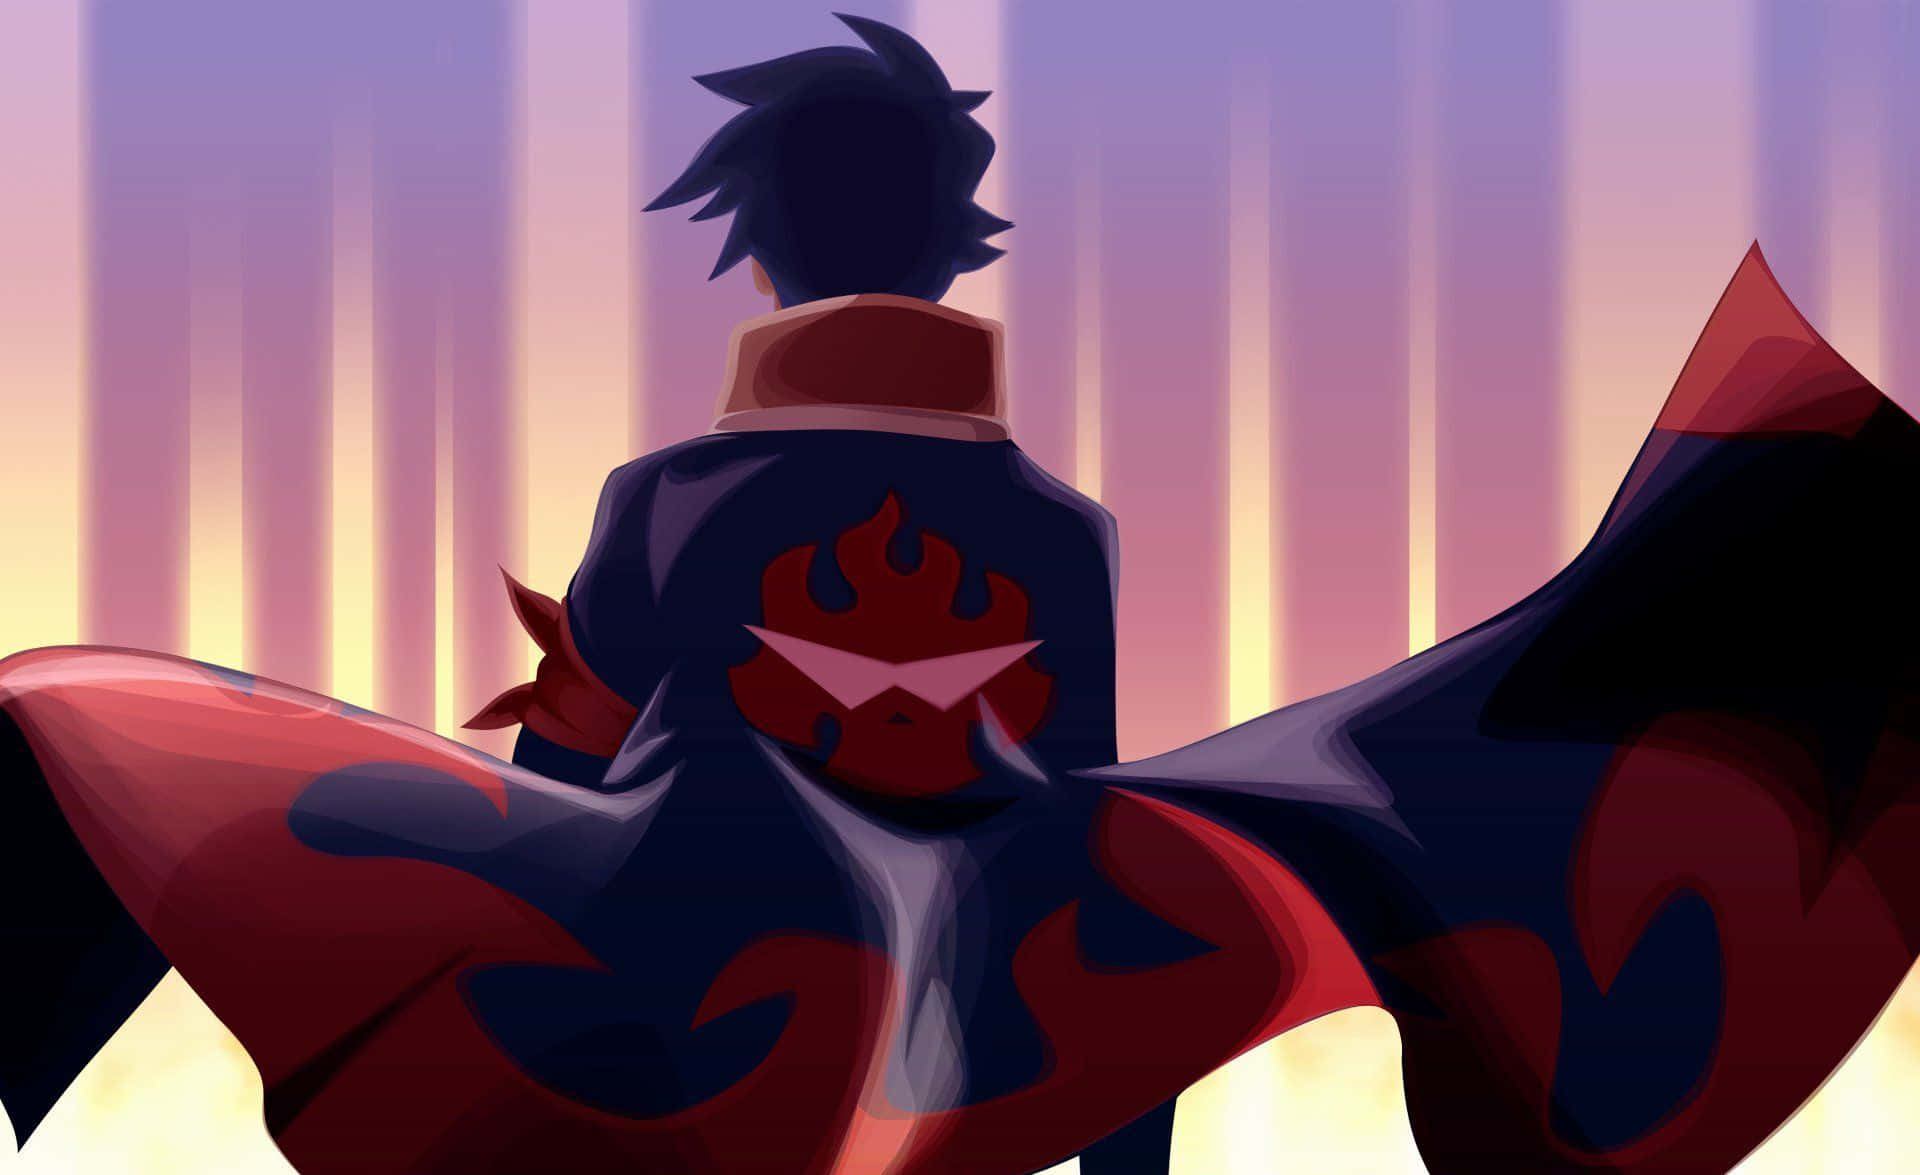 Simon stands confidently in his iconic Gurren Lagann outfit, determination shining in his eyes. Wallpaper